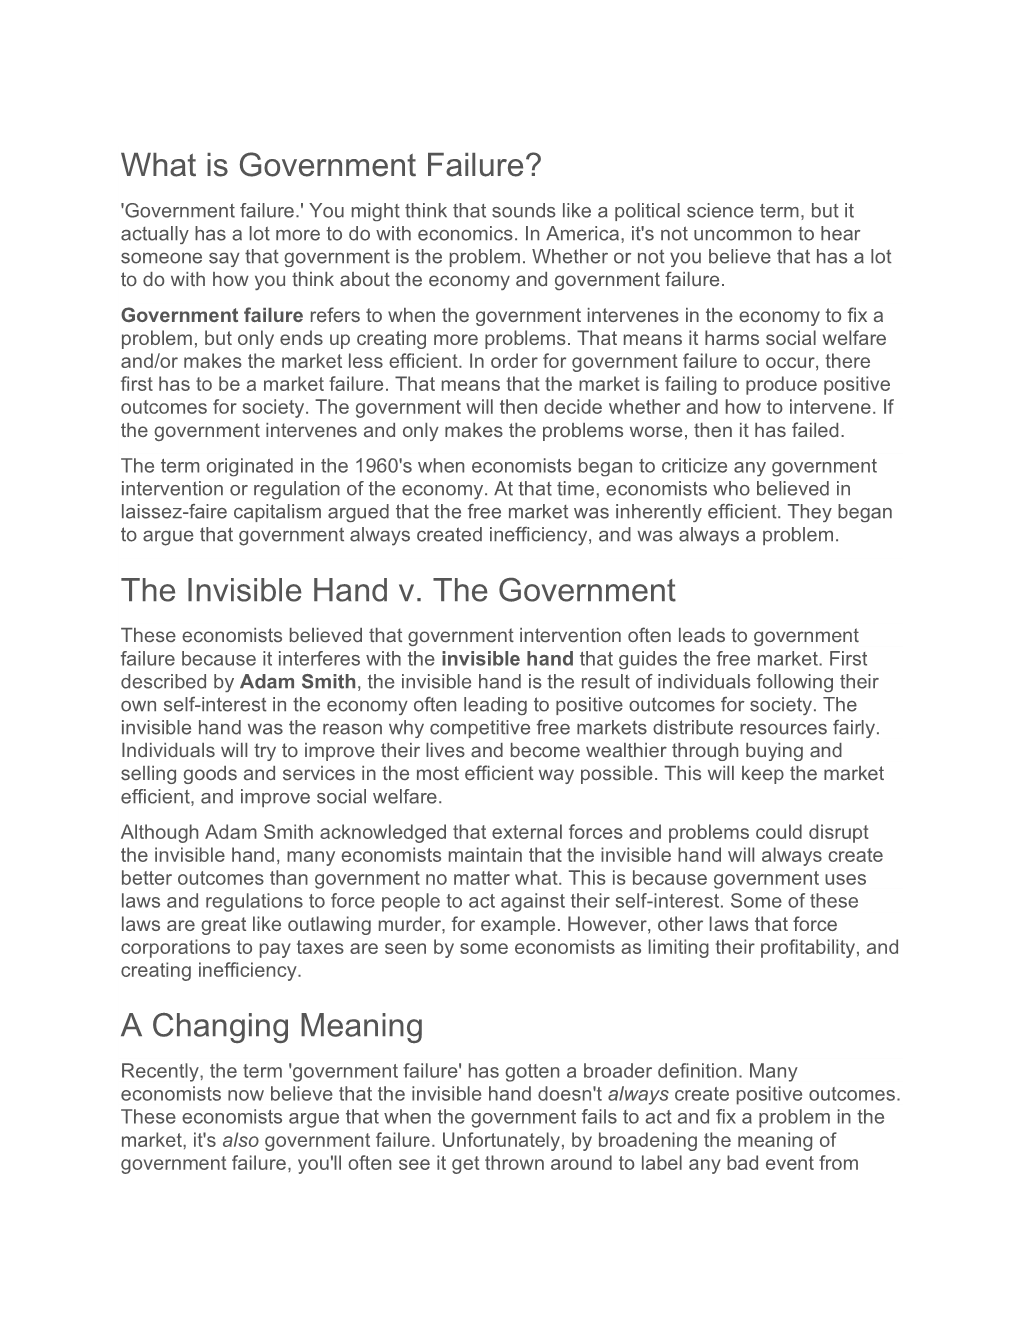 What Is Government Failure? the Invisible Hand V. the Government a Changing Meaning